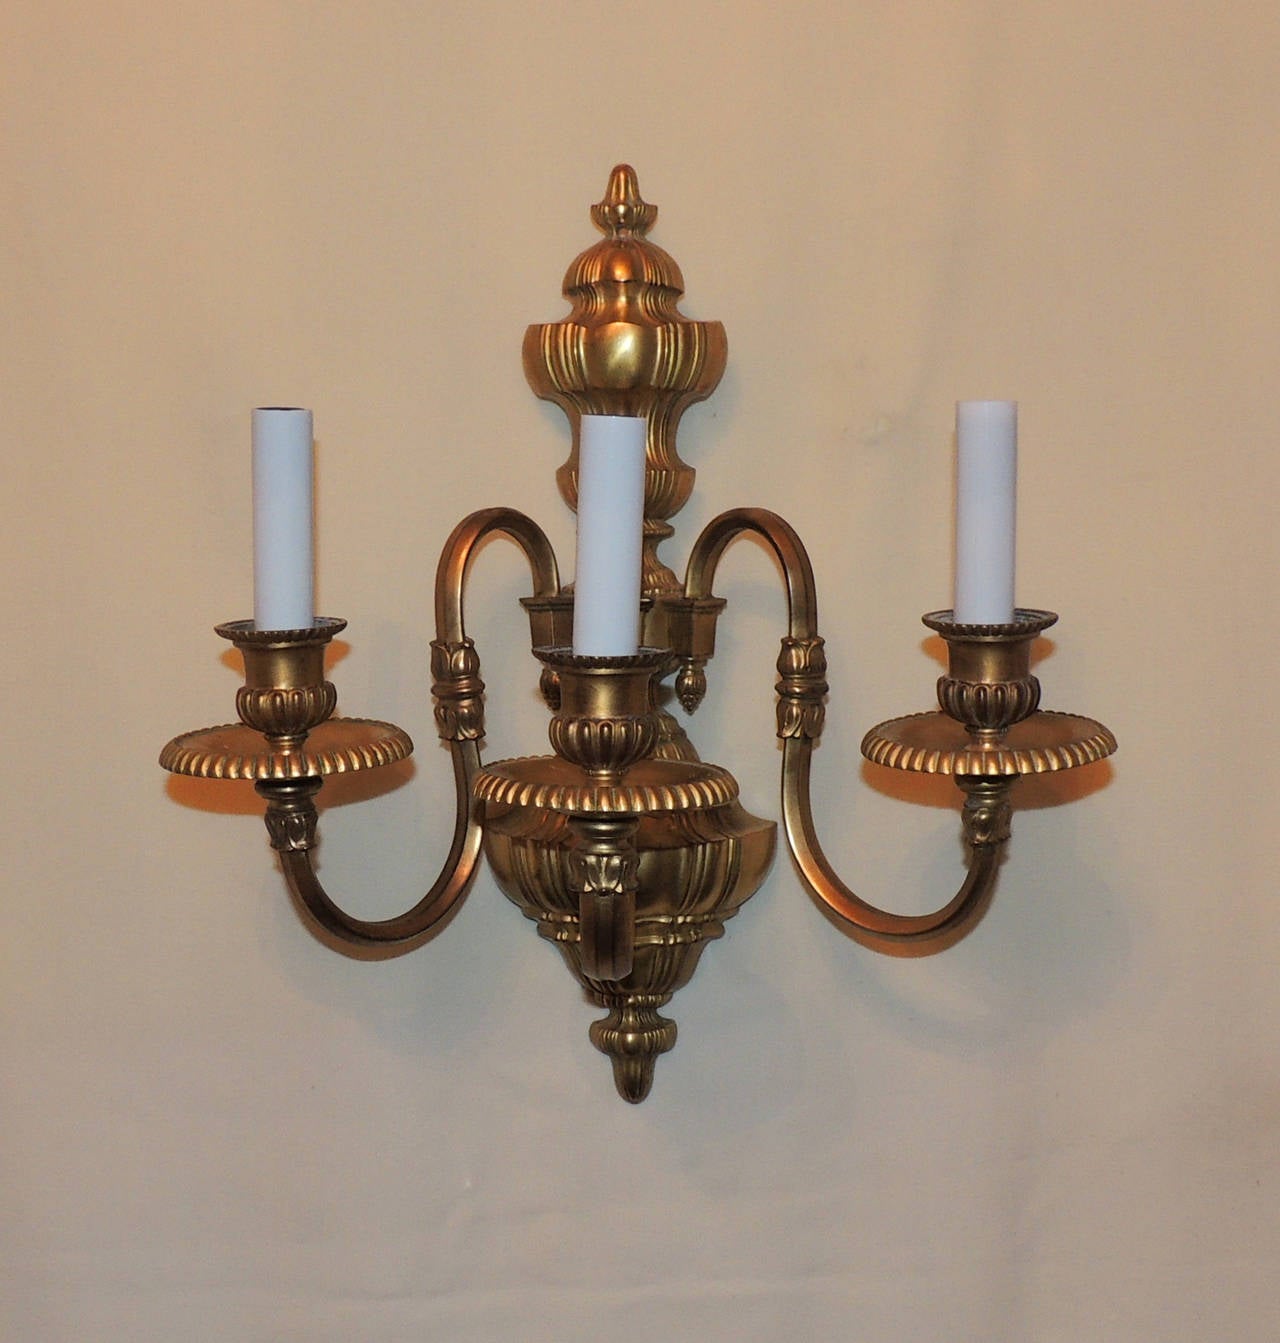 Wonderful fluted detail work encompass these Caldwell doré´ bronze sconces in the Georgian style. The centre urn is 16" high with three arms on sweeping curved arms and are 8" in depth. Wonderful aged patina will look wonderful in many